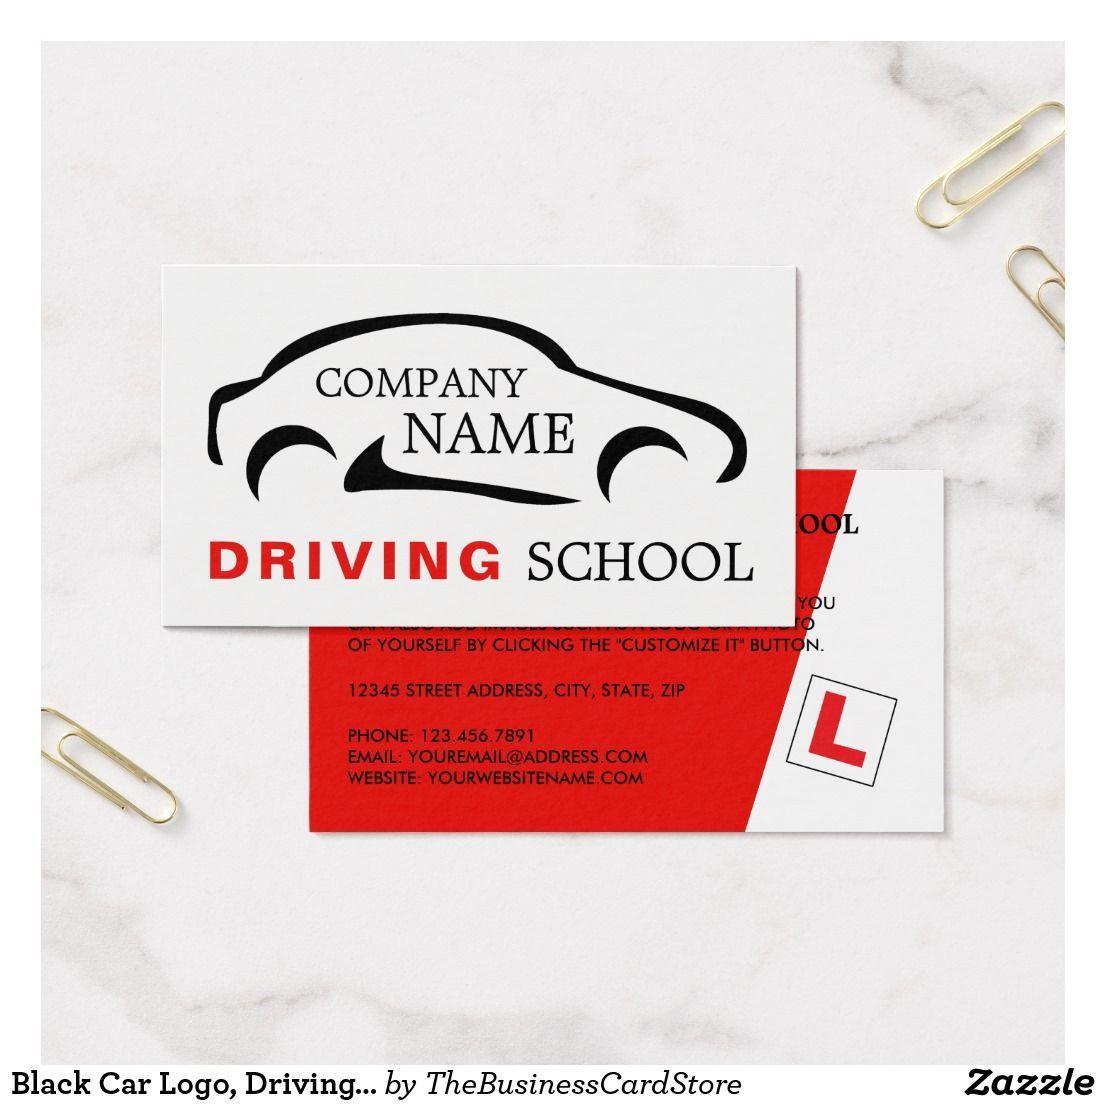 Black and Red Car Logo - Black Car Logo, Driving Instructor Business Card. Business